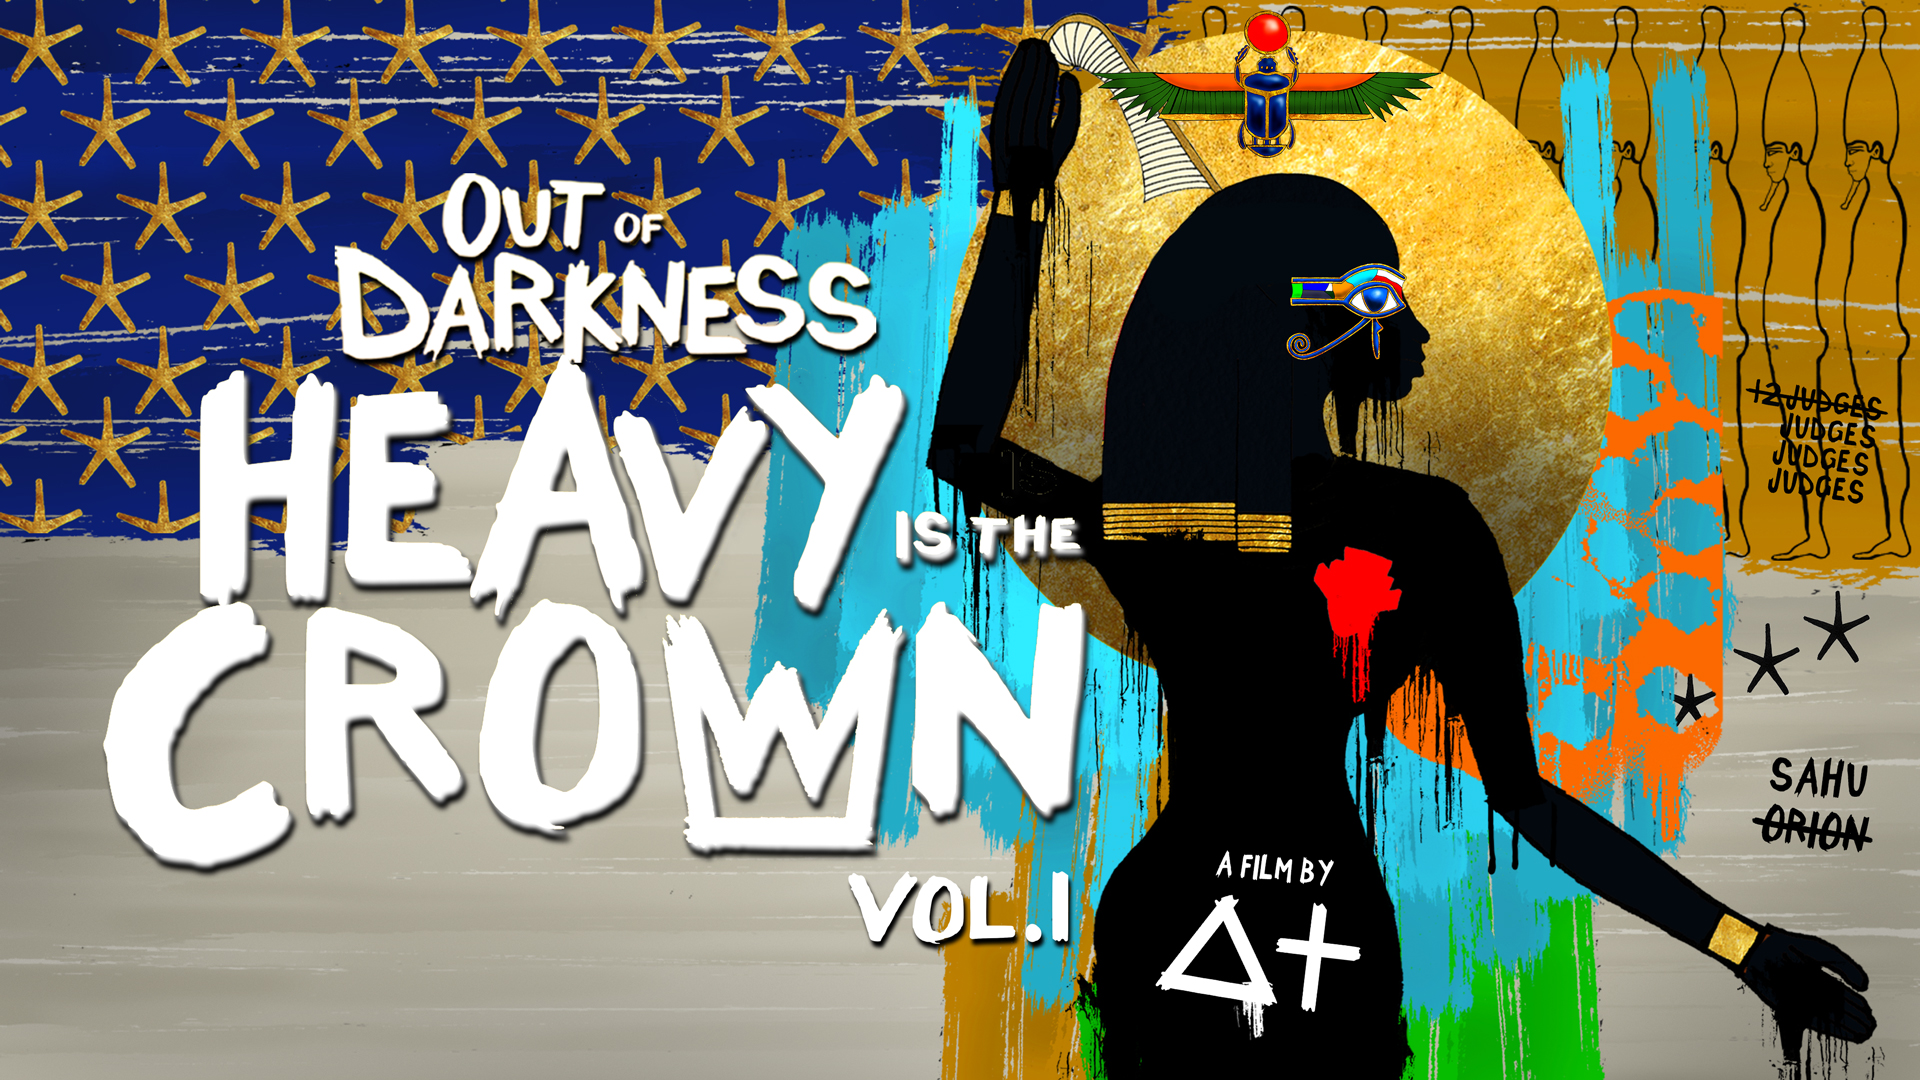 You are currently viewing UK Premiere Screening – ‘Out of Darkness: Heavy is the Crown Vol. 1’